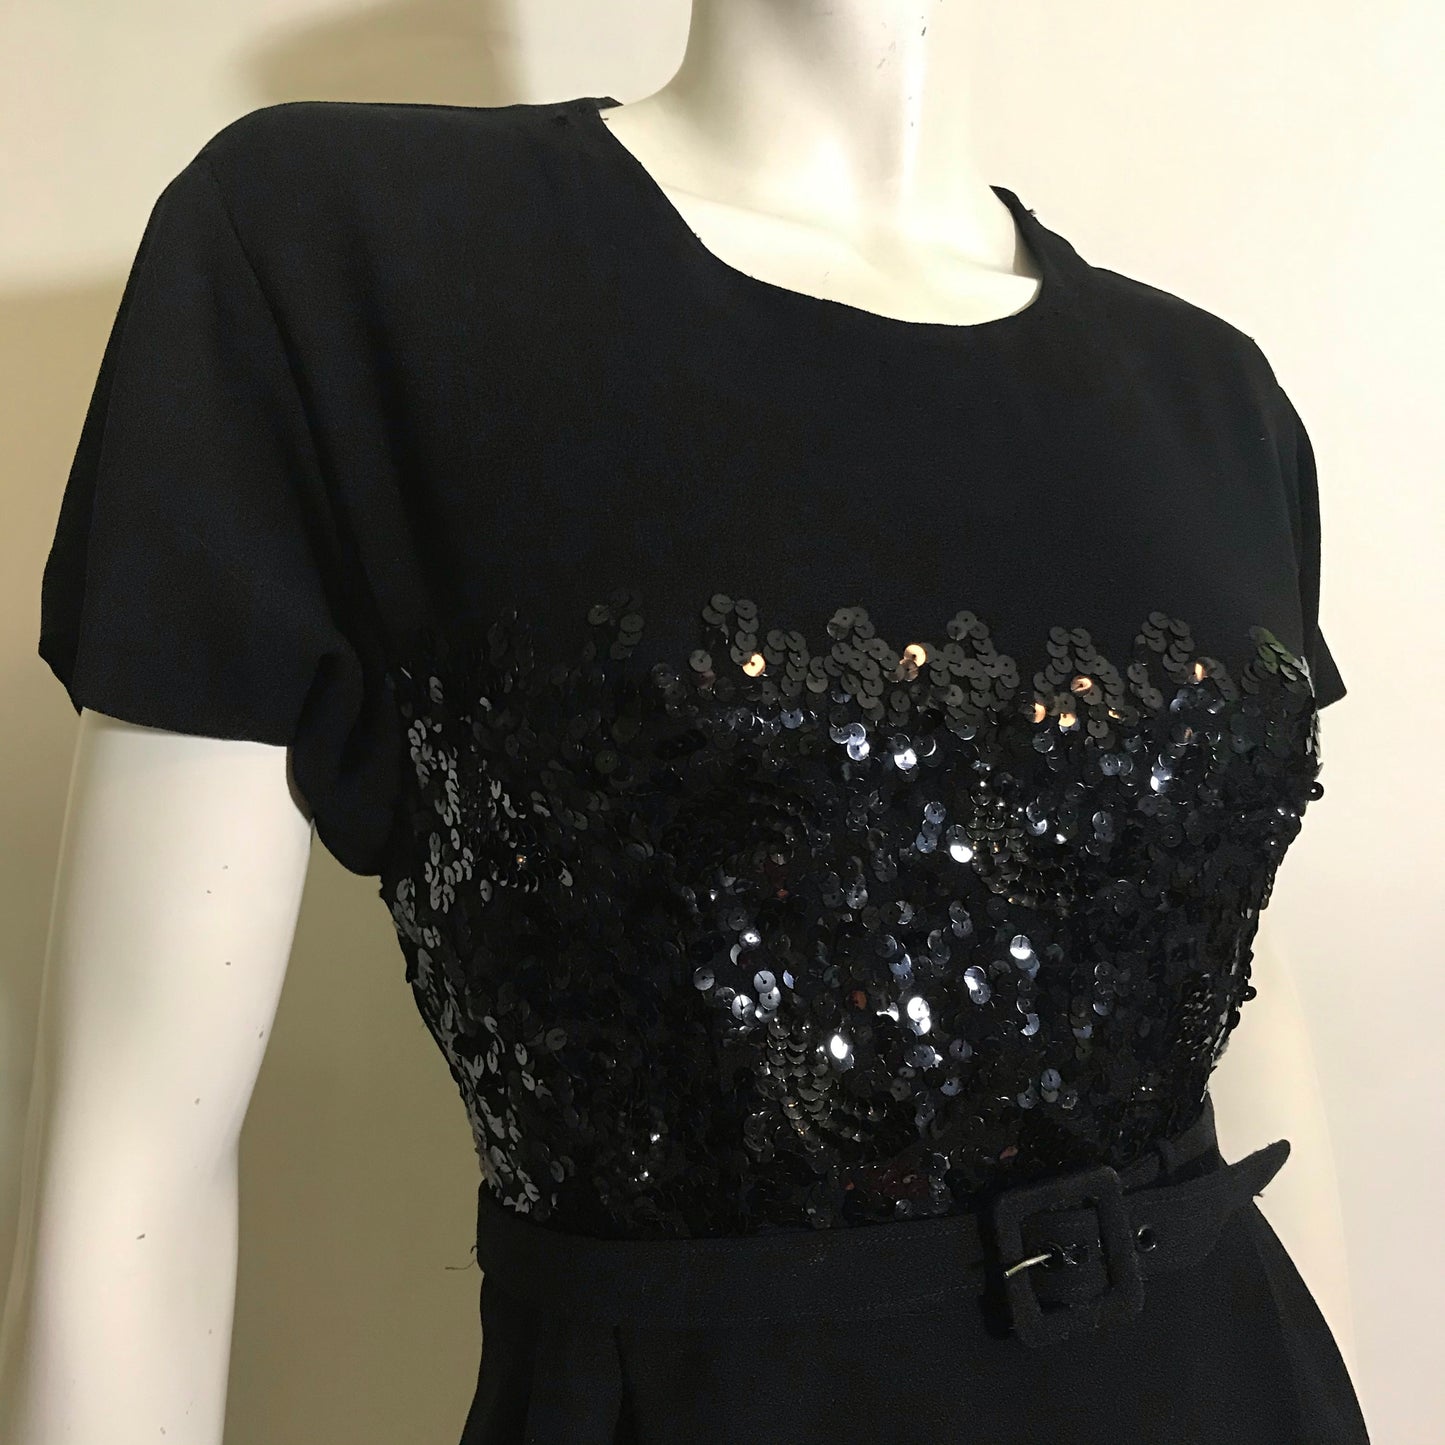 Black Crepe Rayon Cocktail Dress with Sequined Bodice Petite circa 1940s